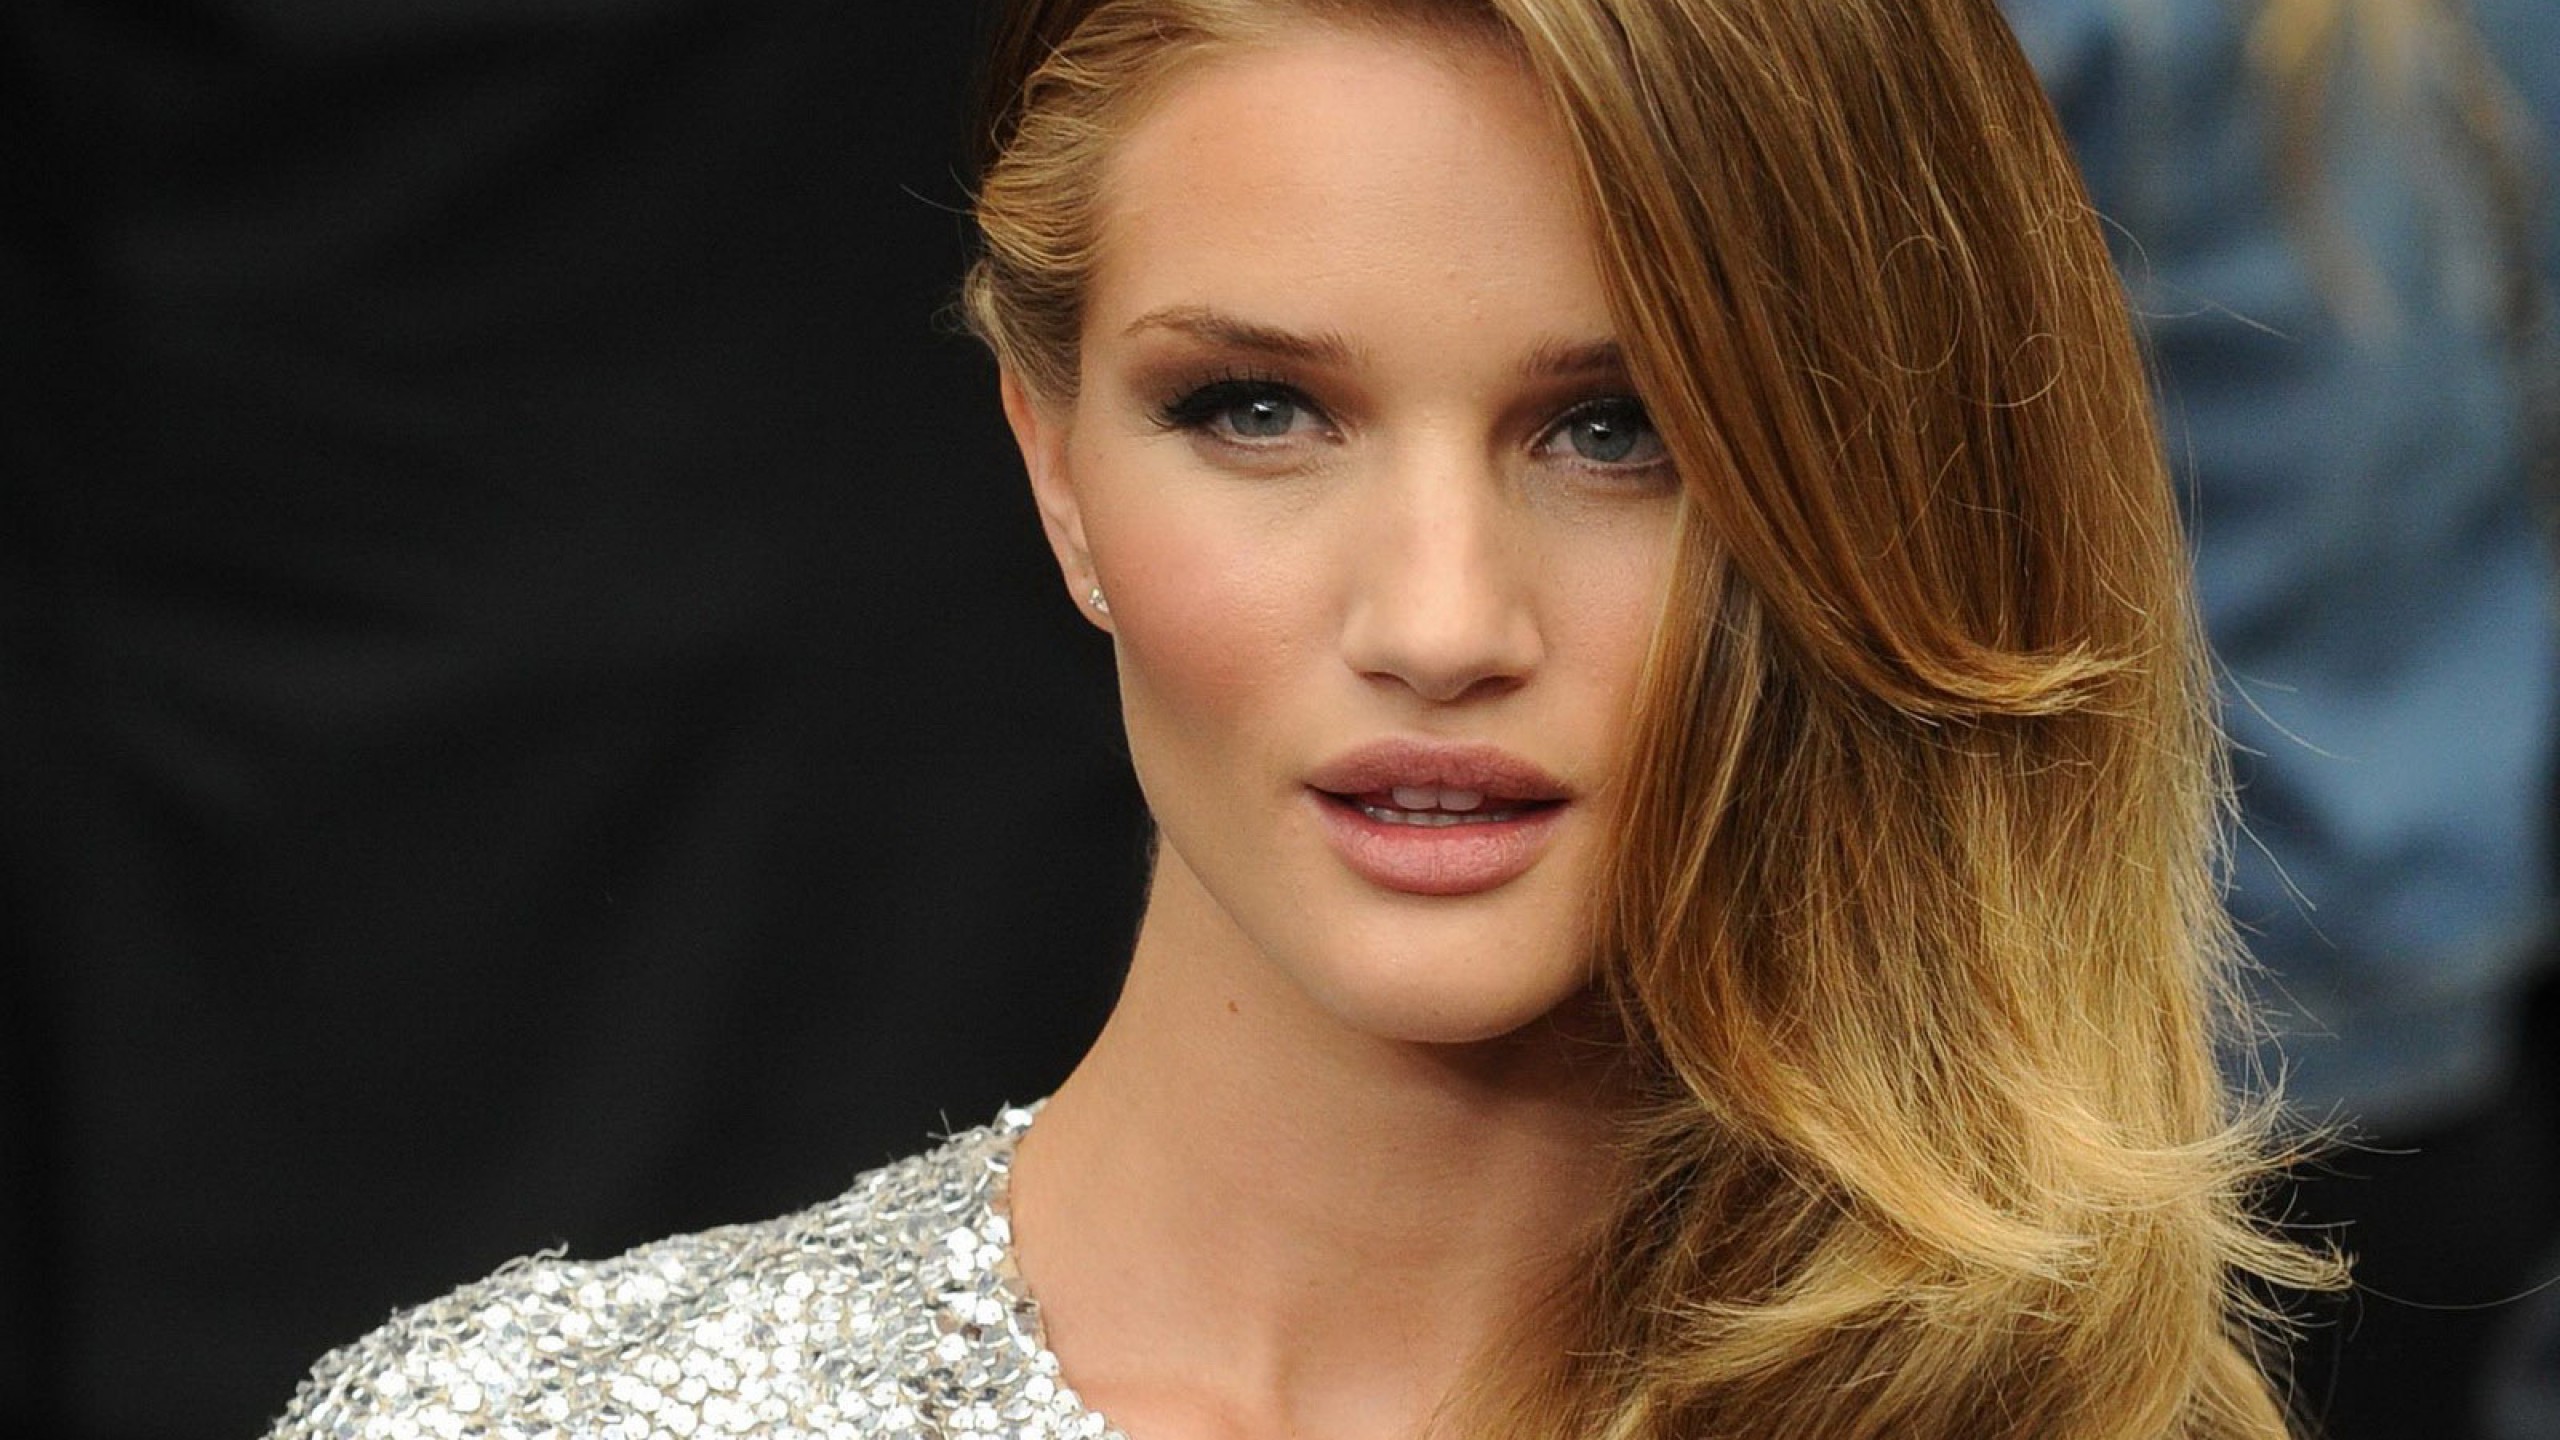 Rosie Huntington-Whiteley Wallpapers Images Photos Pictures Backgrounds